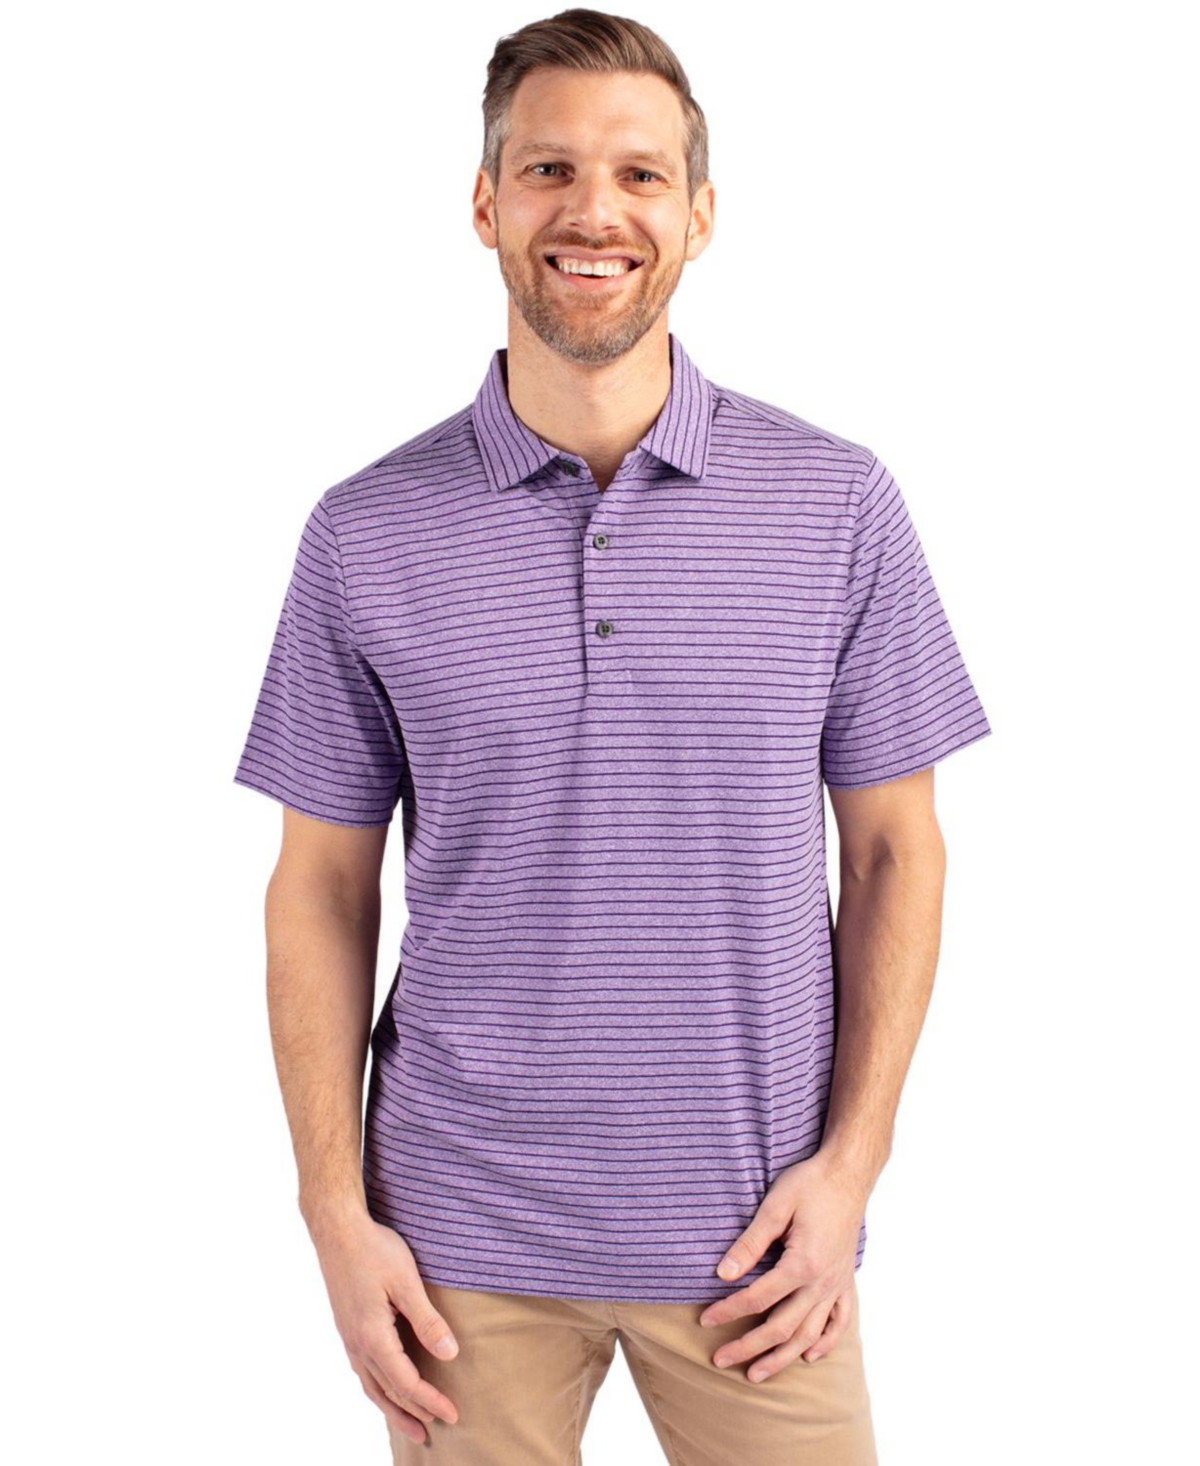 Men's Forge Eco Heather Stripe Stretch Recycled Polo Shirt - College purple heather